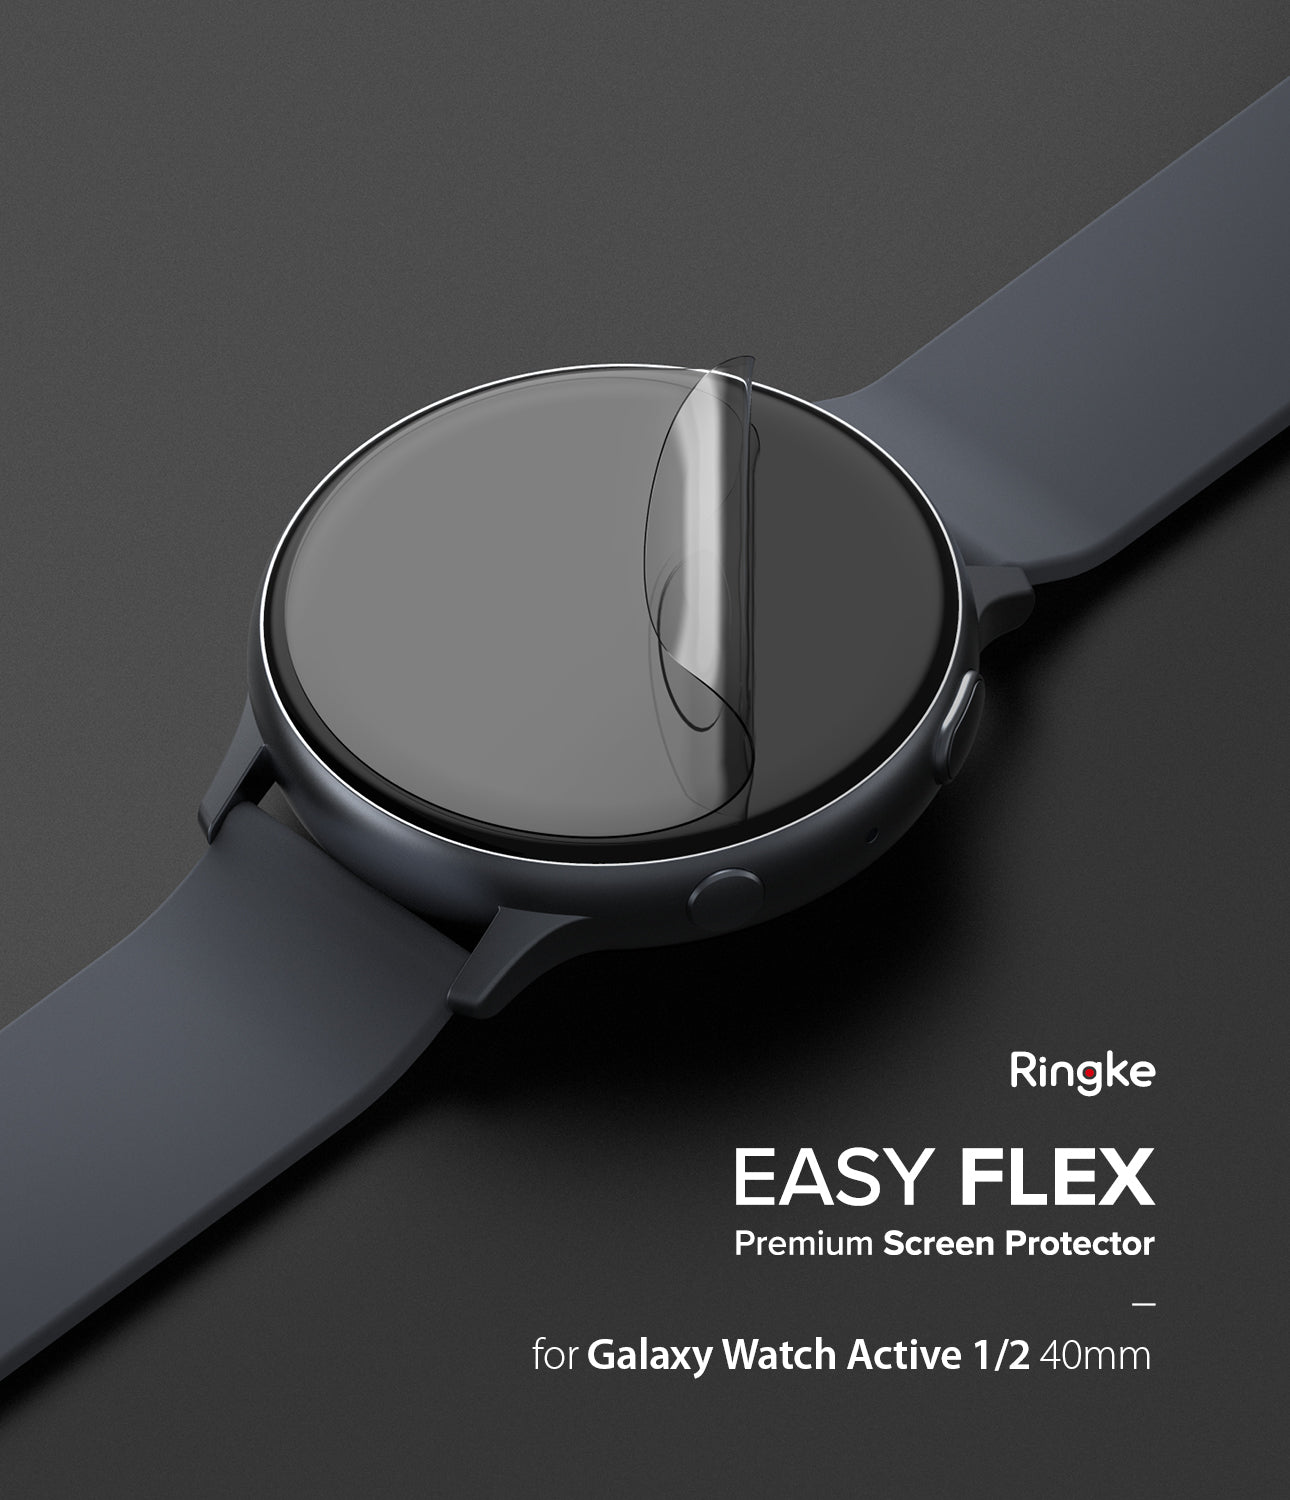 samsung galaxy watch active 1/2 40mm screen protector - ringke easy flex [3 pack]